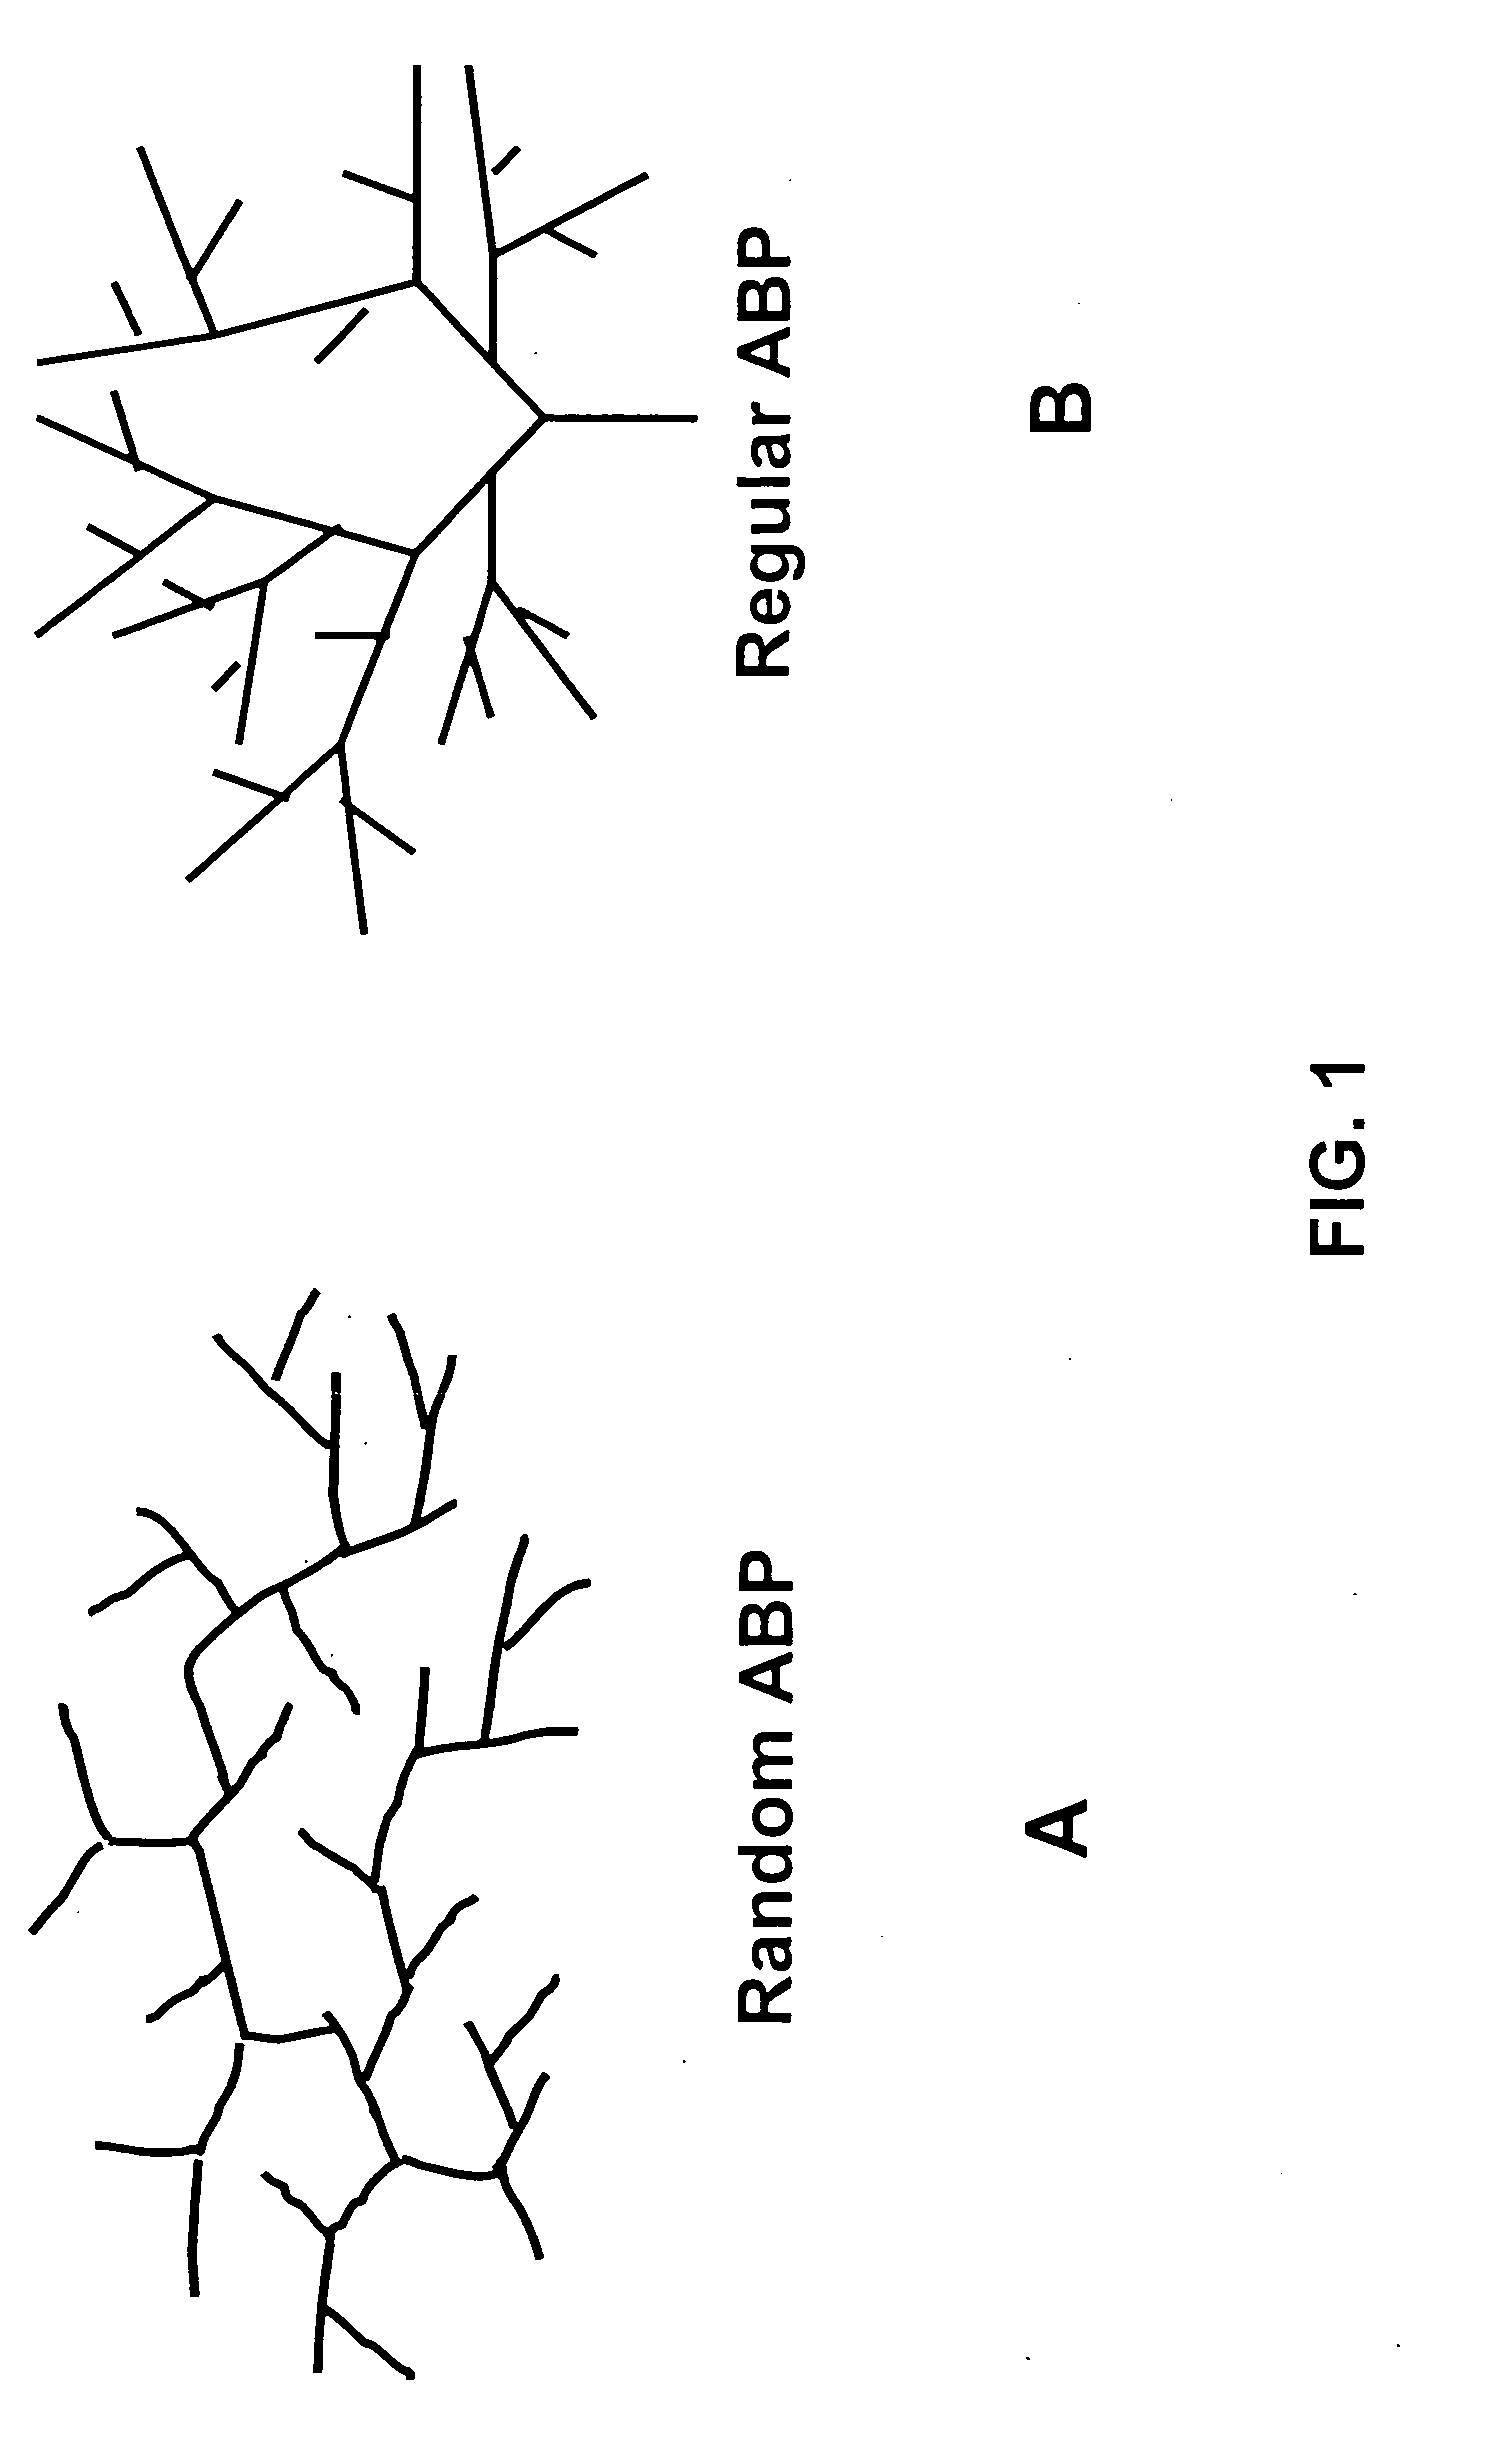 Asymmetrically branched polymer conjugates and microarray assays